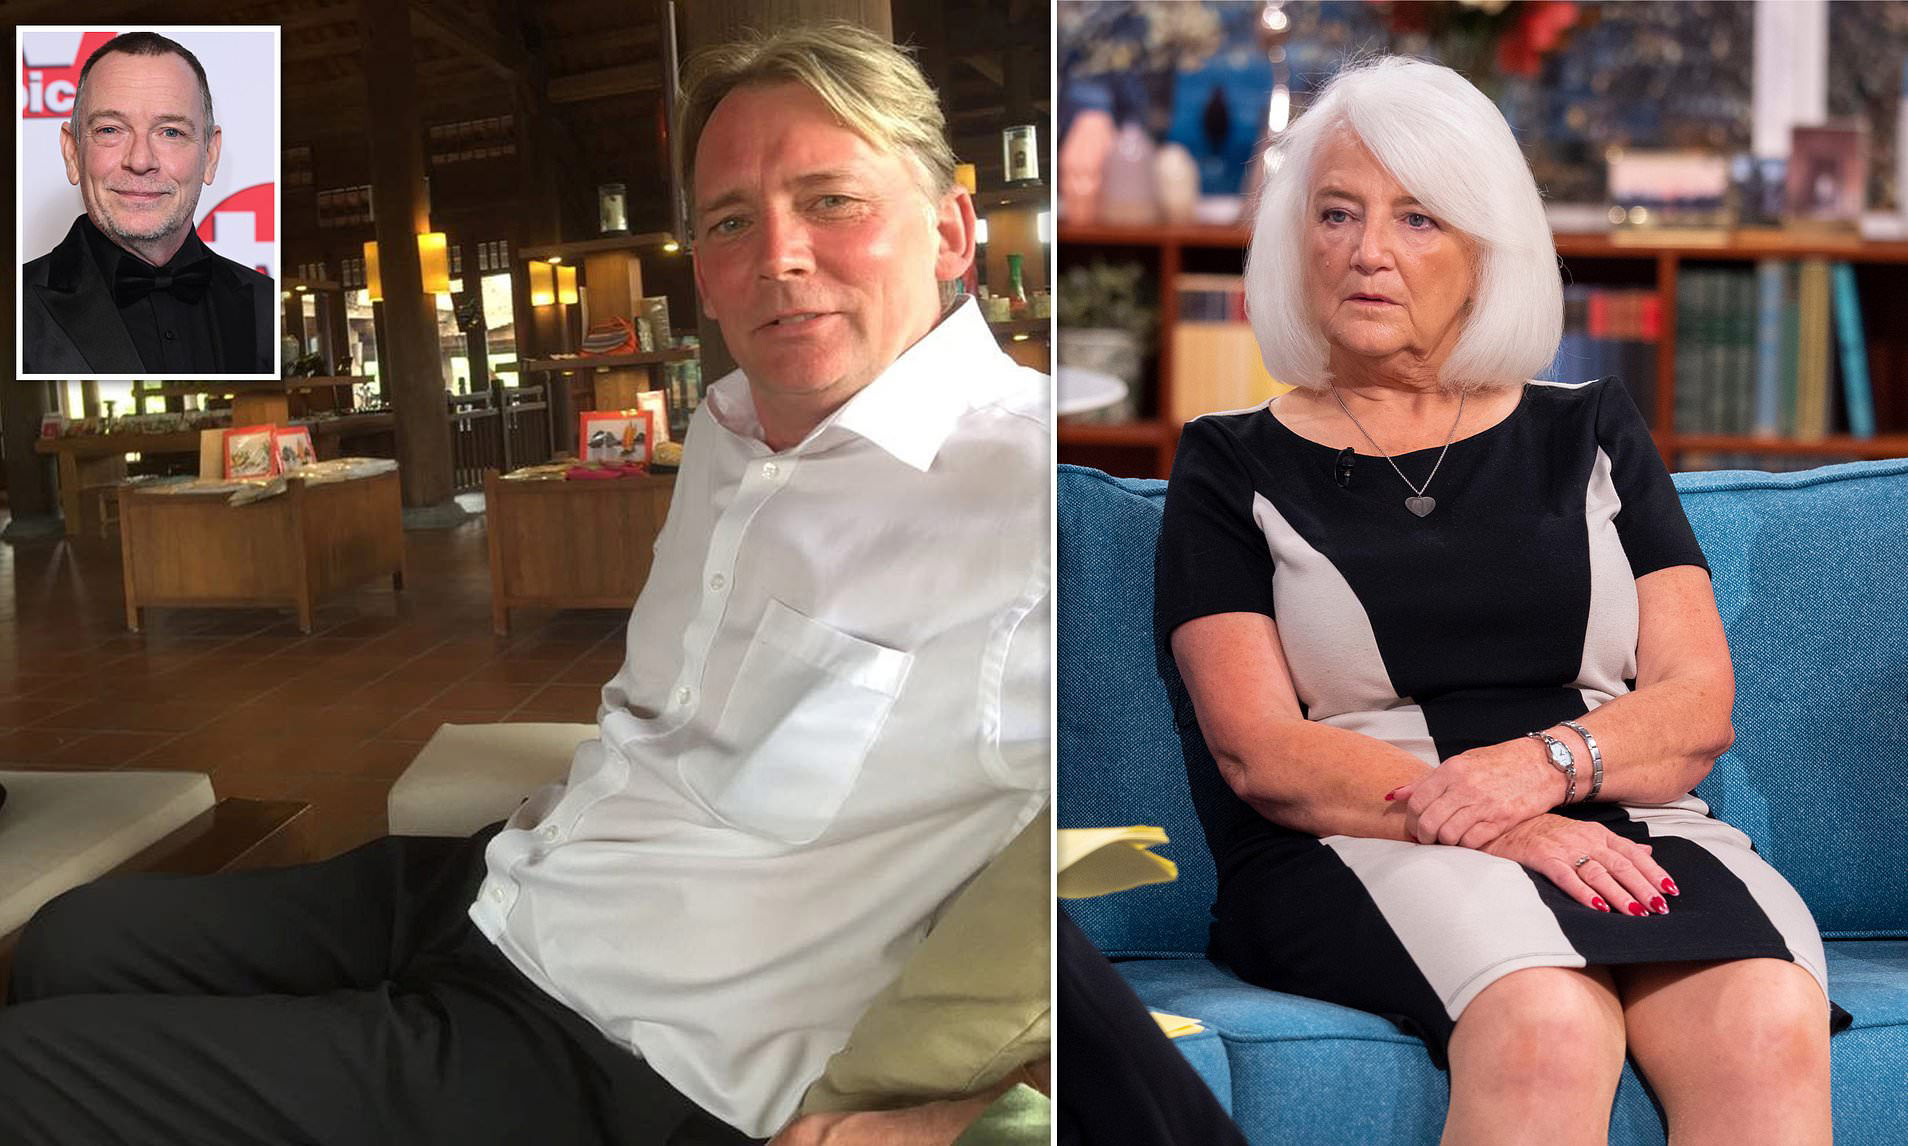 Evil' Ian Beale lookalike is the 'devil incarnate', says victim of Casanova  conman: Pensioner, 74, duped out of her life savings by Lotto fantasist says  her life has been 'ruined' - as